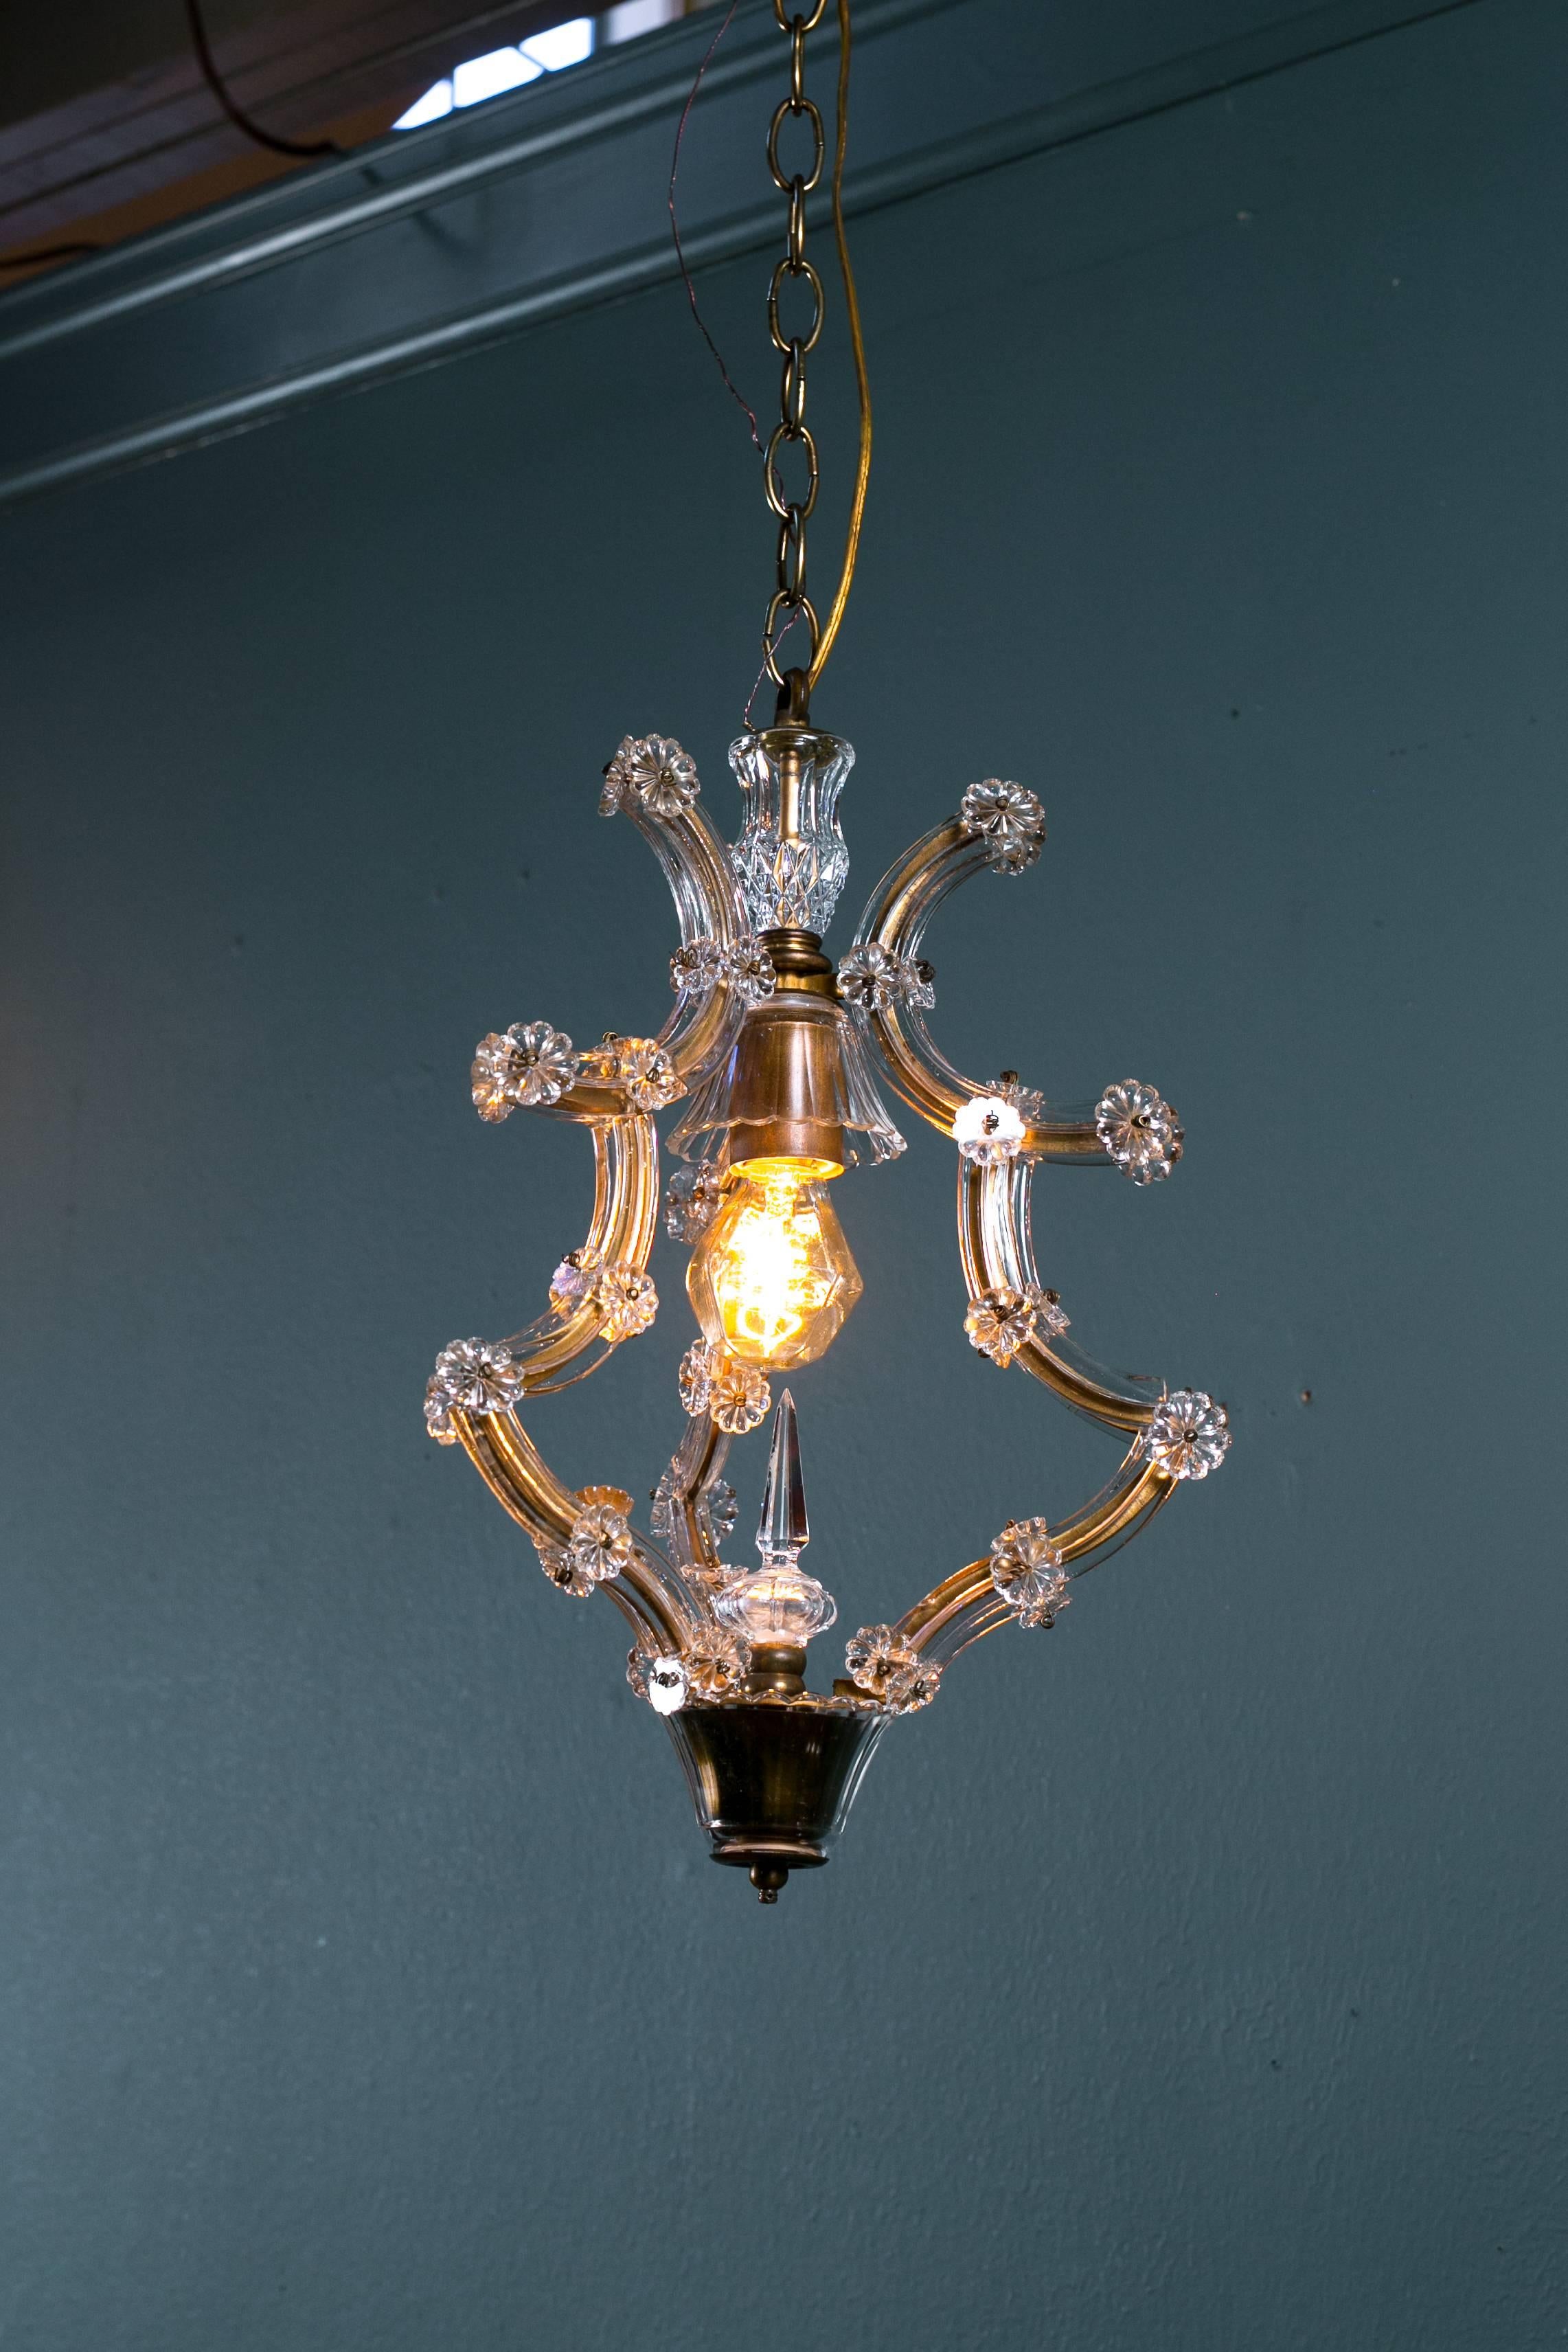 Matching pair of vintage French pendants in the Maria Theresa style. Glass pieces and rosettes over a gilt brass cage. Newly wired in the USA with all UL approved parts and a single Edison socket. Comes with matching chain and canopies.